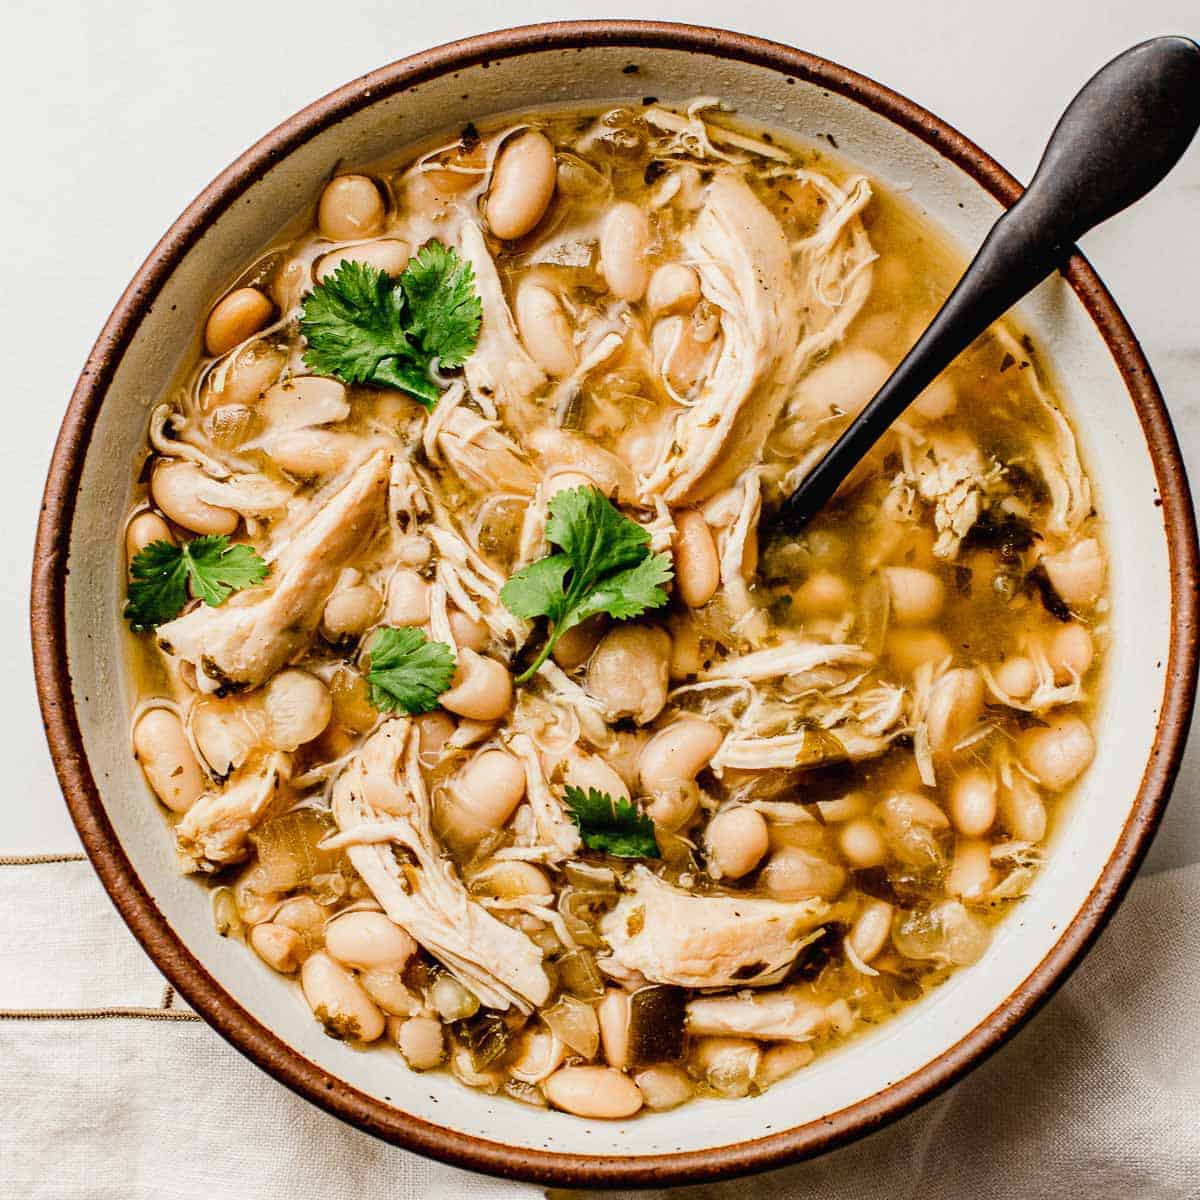 Slow cooker chicken chili verde in a bowl.